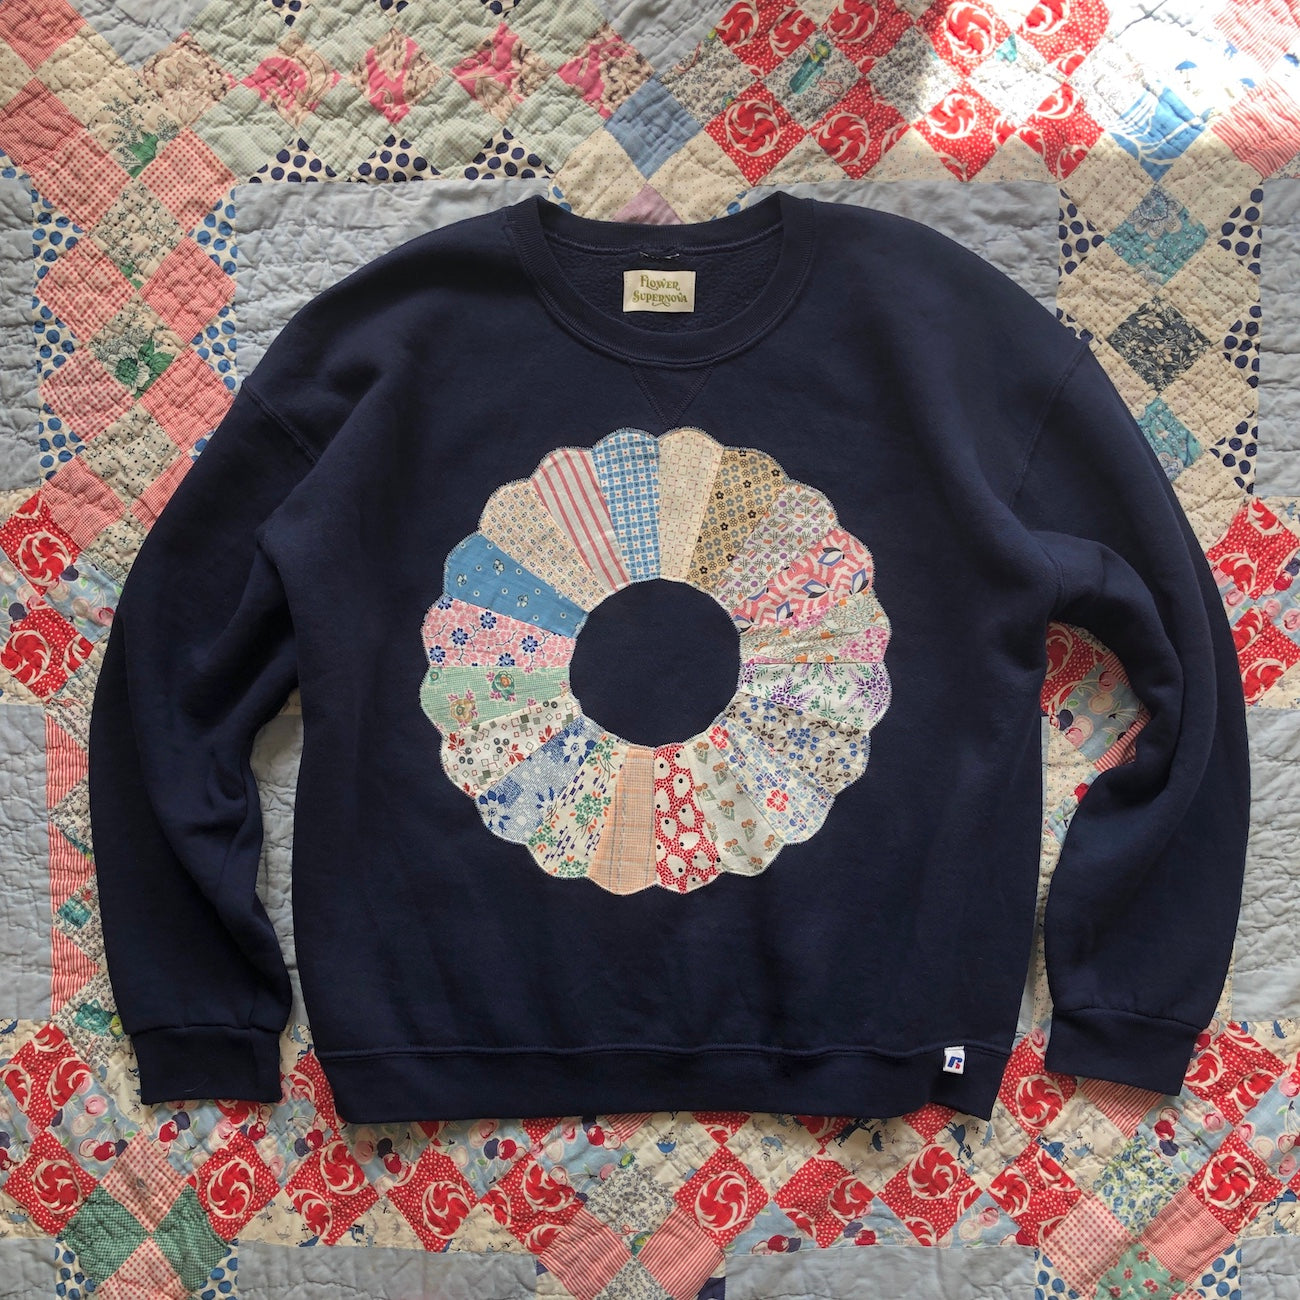 Navy blue crewneck sweatshirt with Dresden Plate vintage quilt patch sewn to front by Flower Supernova.